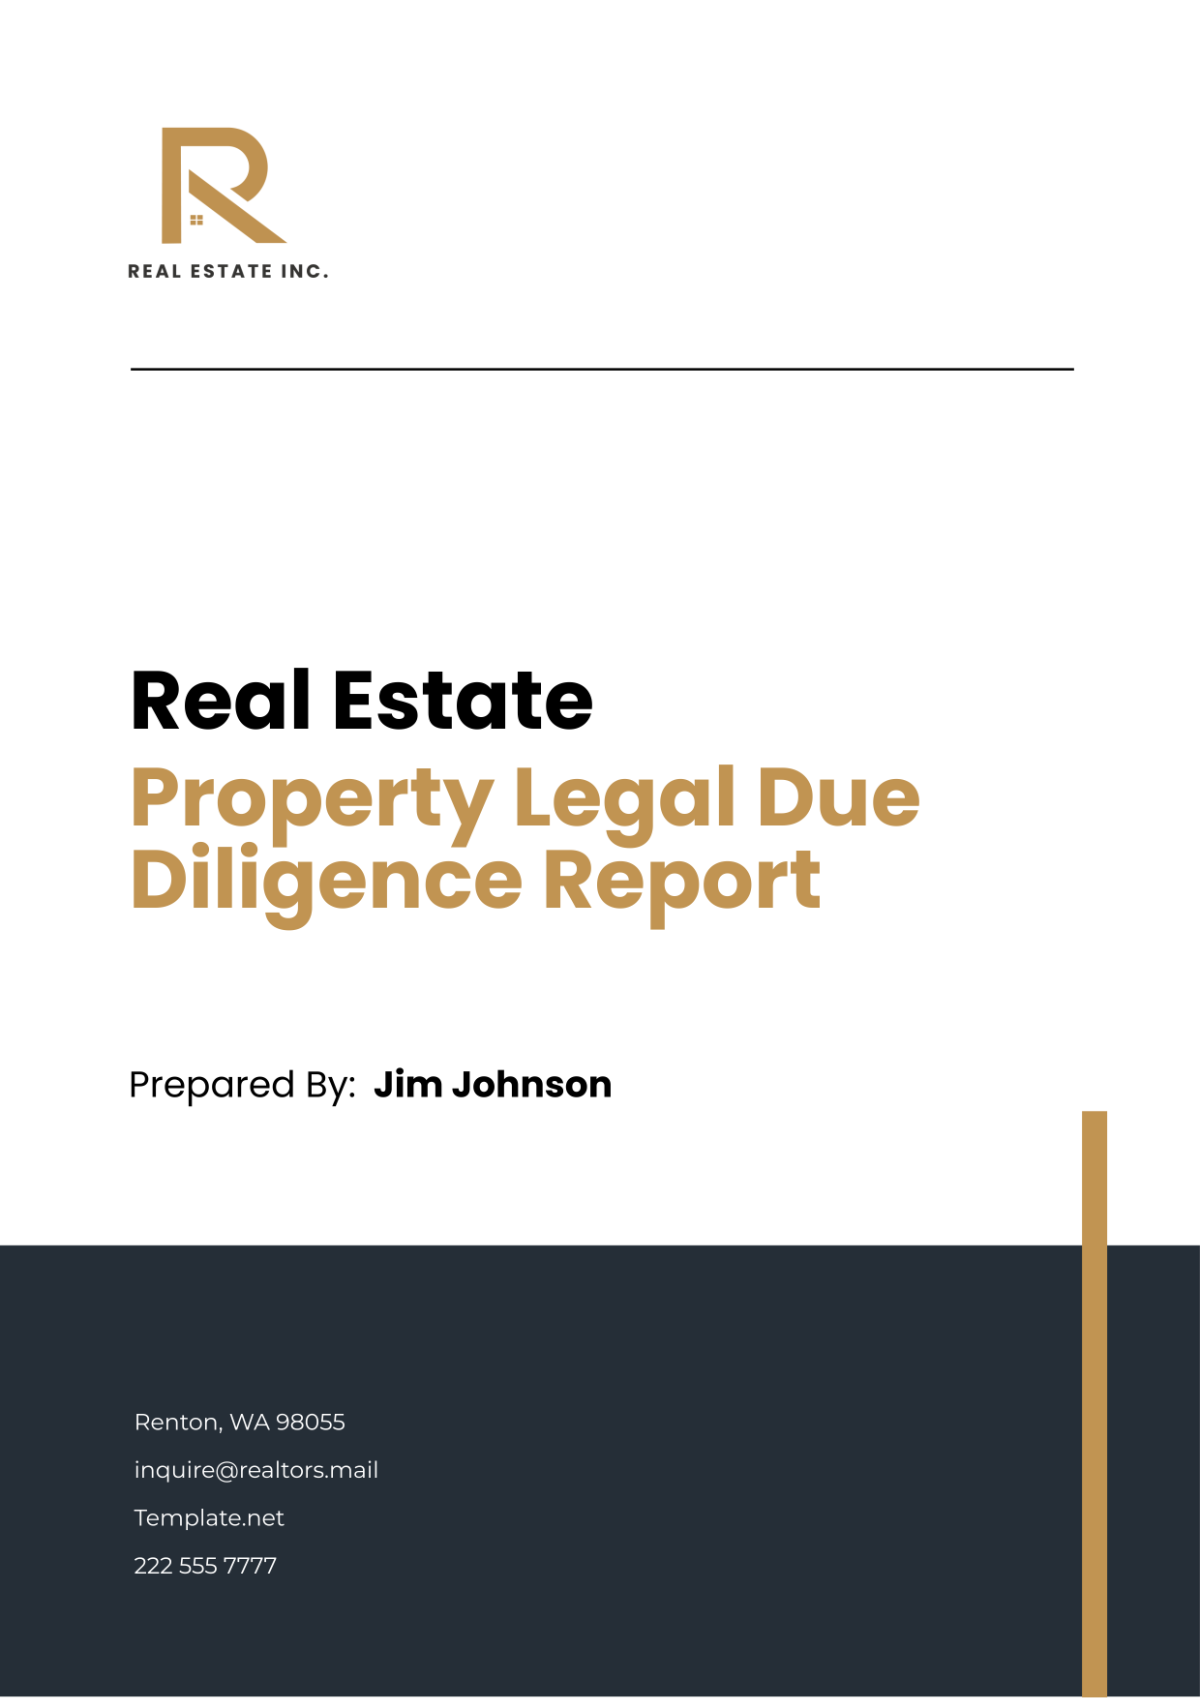 Real Estate Property Legal Due Diligence Report Template